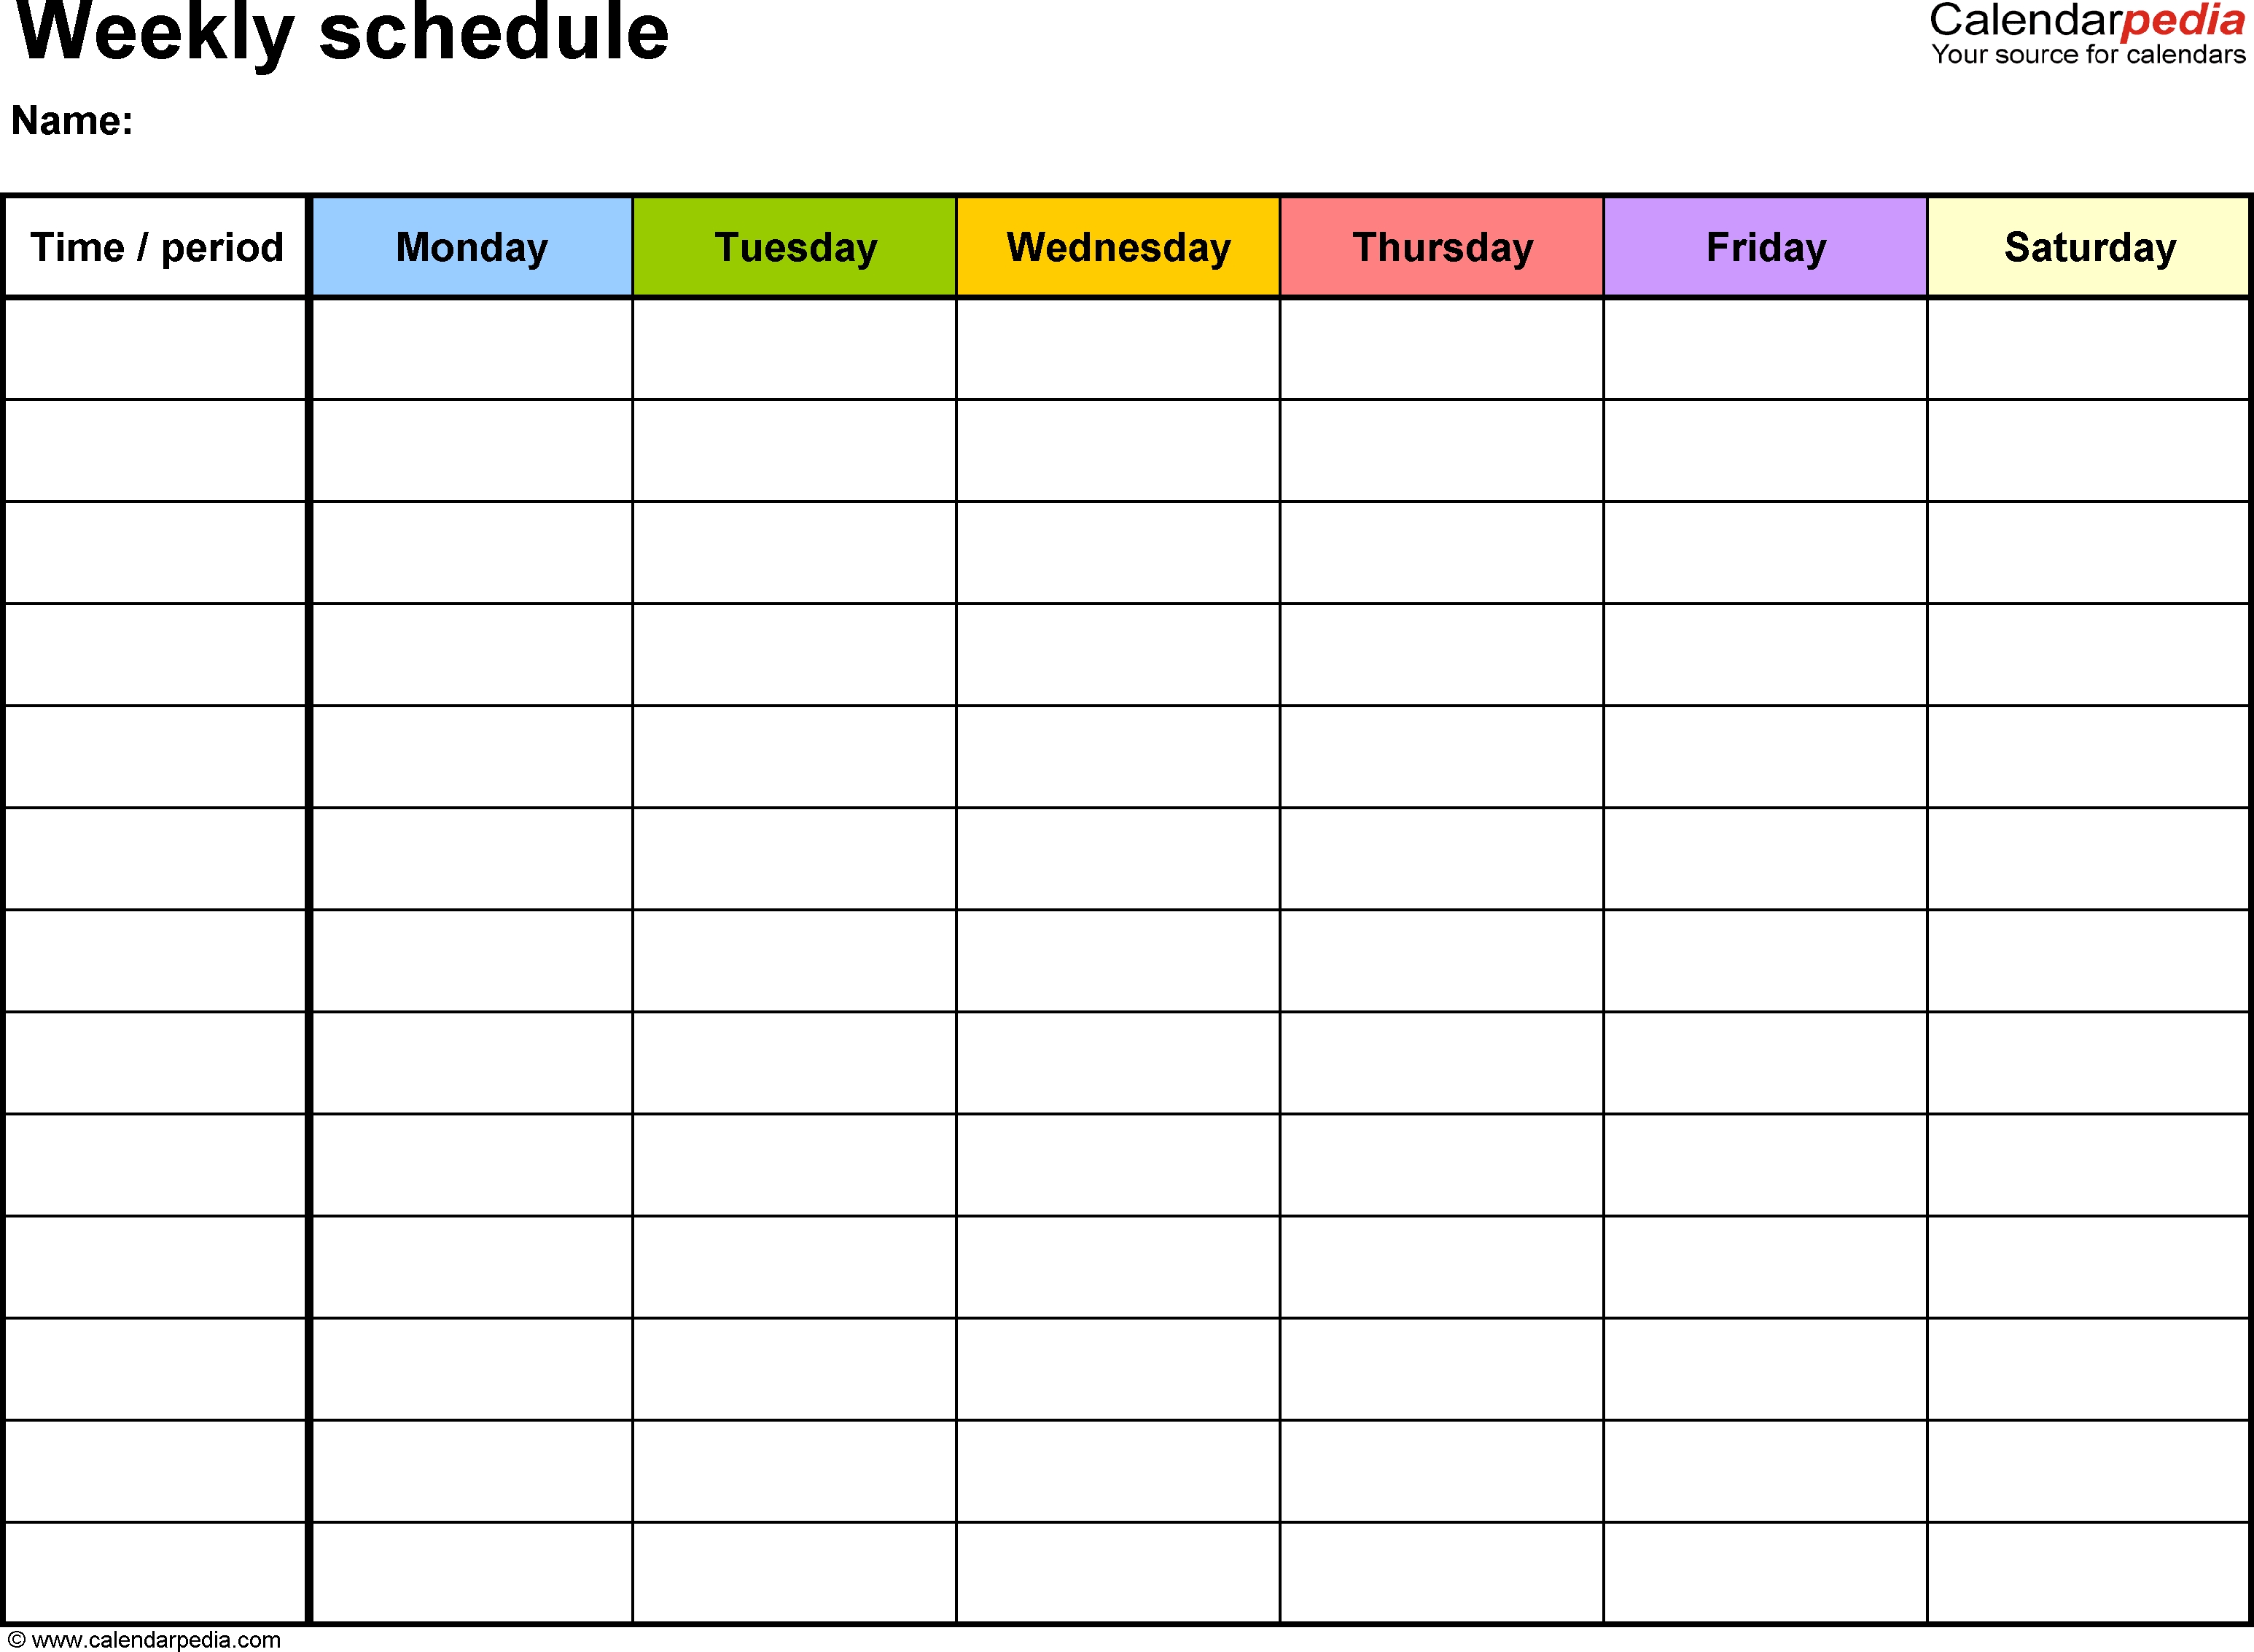 Free Weekly Schedule Templates For Word - 18 Templates regarding Blank Weekly Calendays With Time